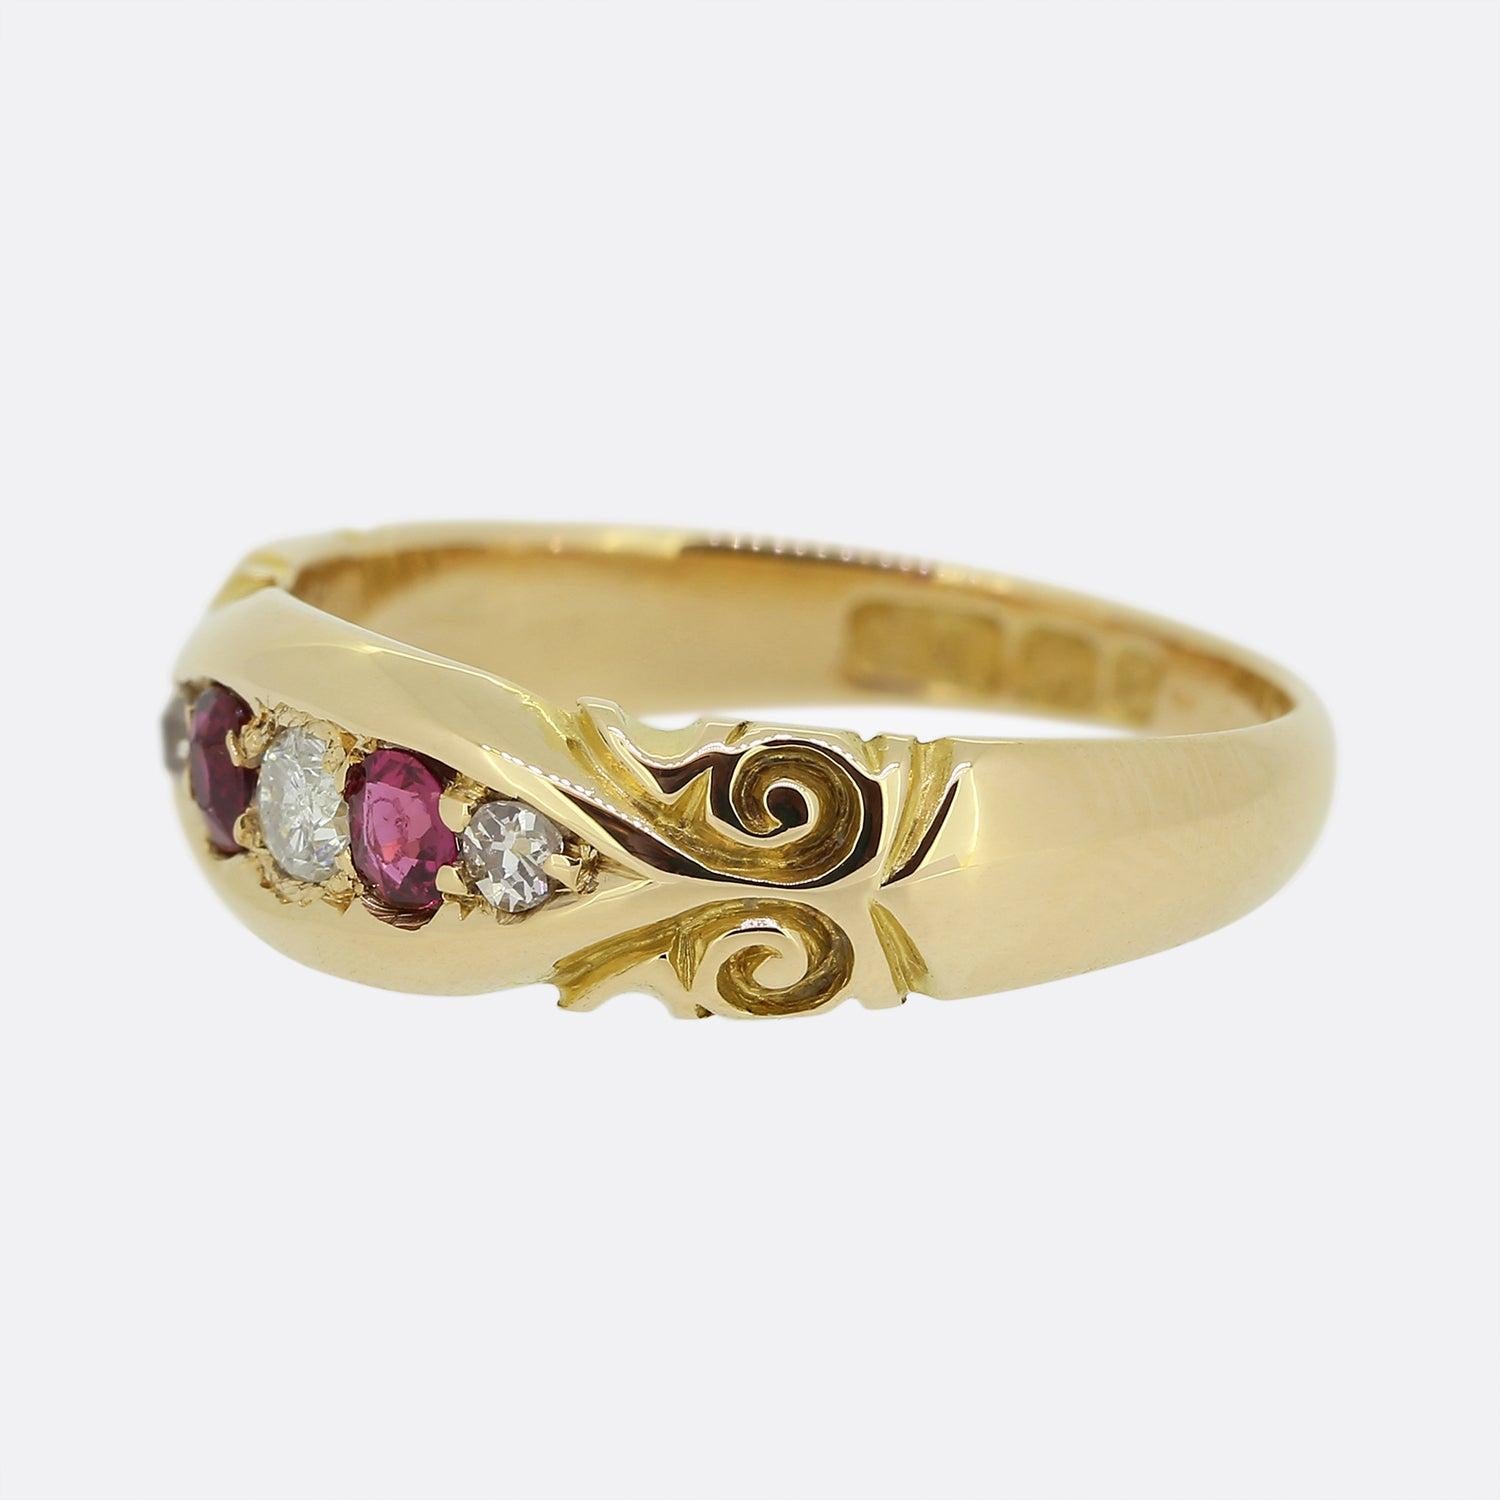 Here we have a vintage ruby and diamond five-stone ring borrowing from a Victorian style. A boat shaped face plays host to a single round brilliant cut diamond which flanked on either side by a round ruby and old cut diamond. Each stone here has